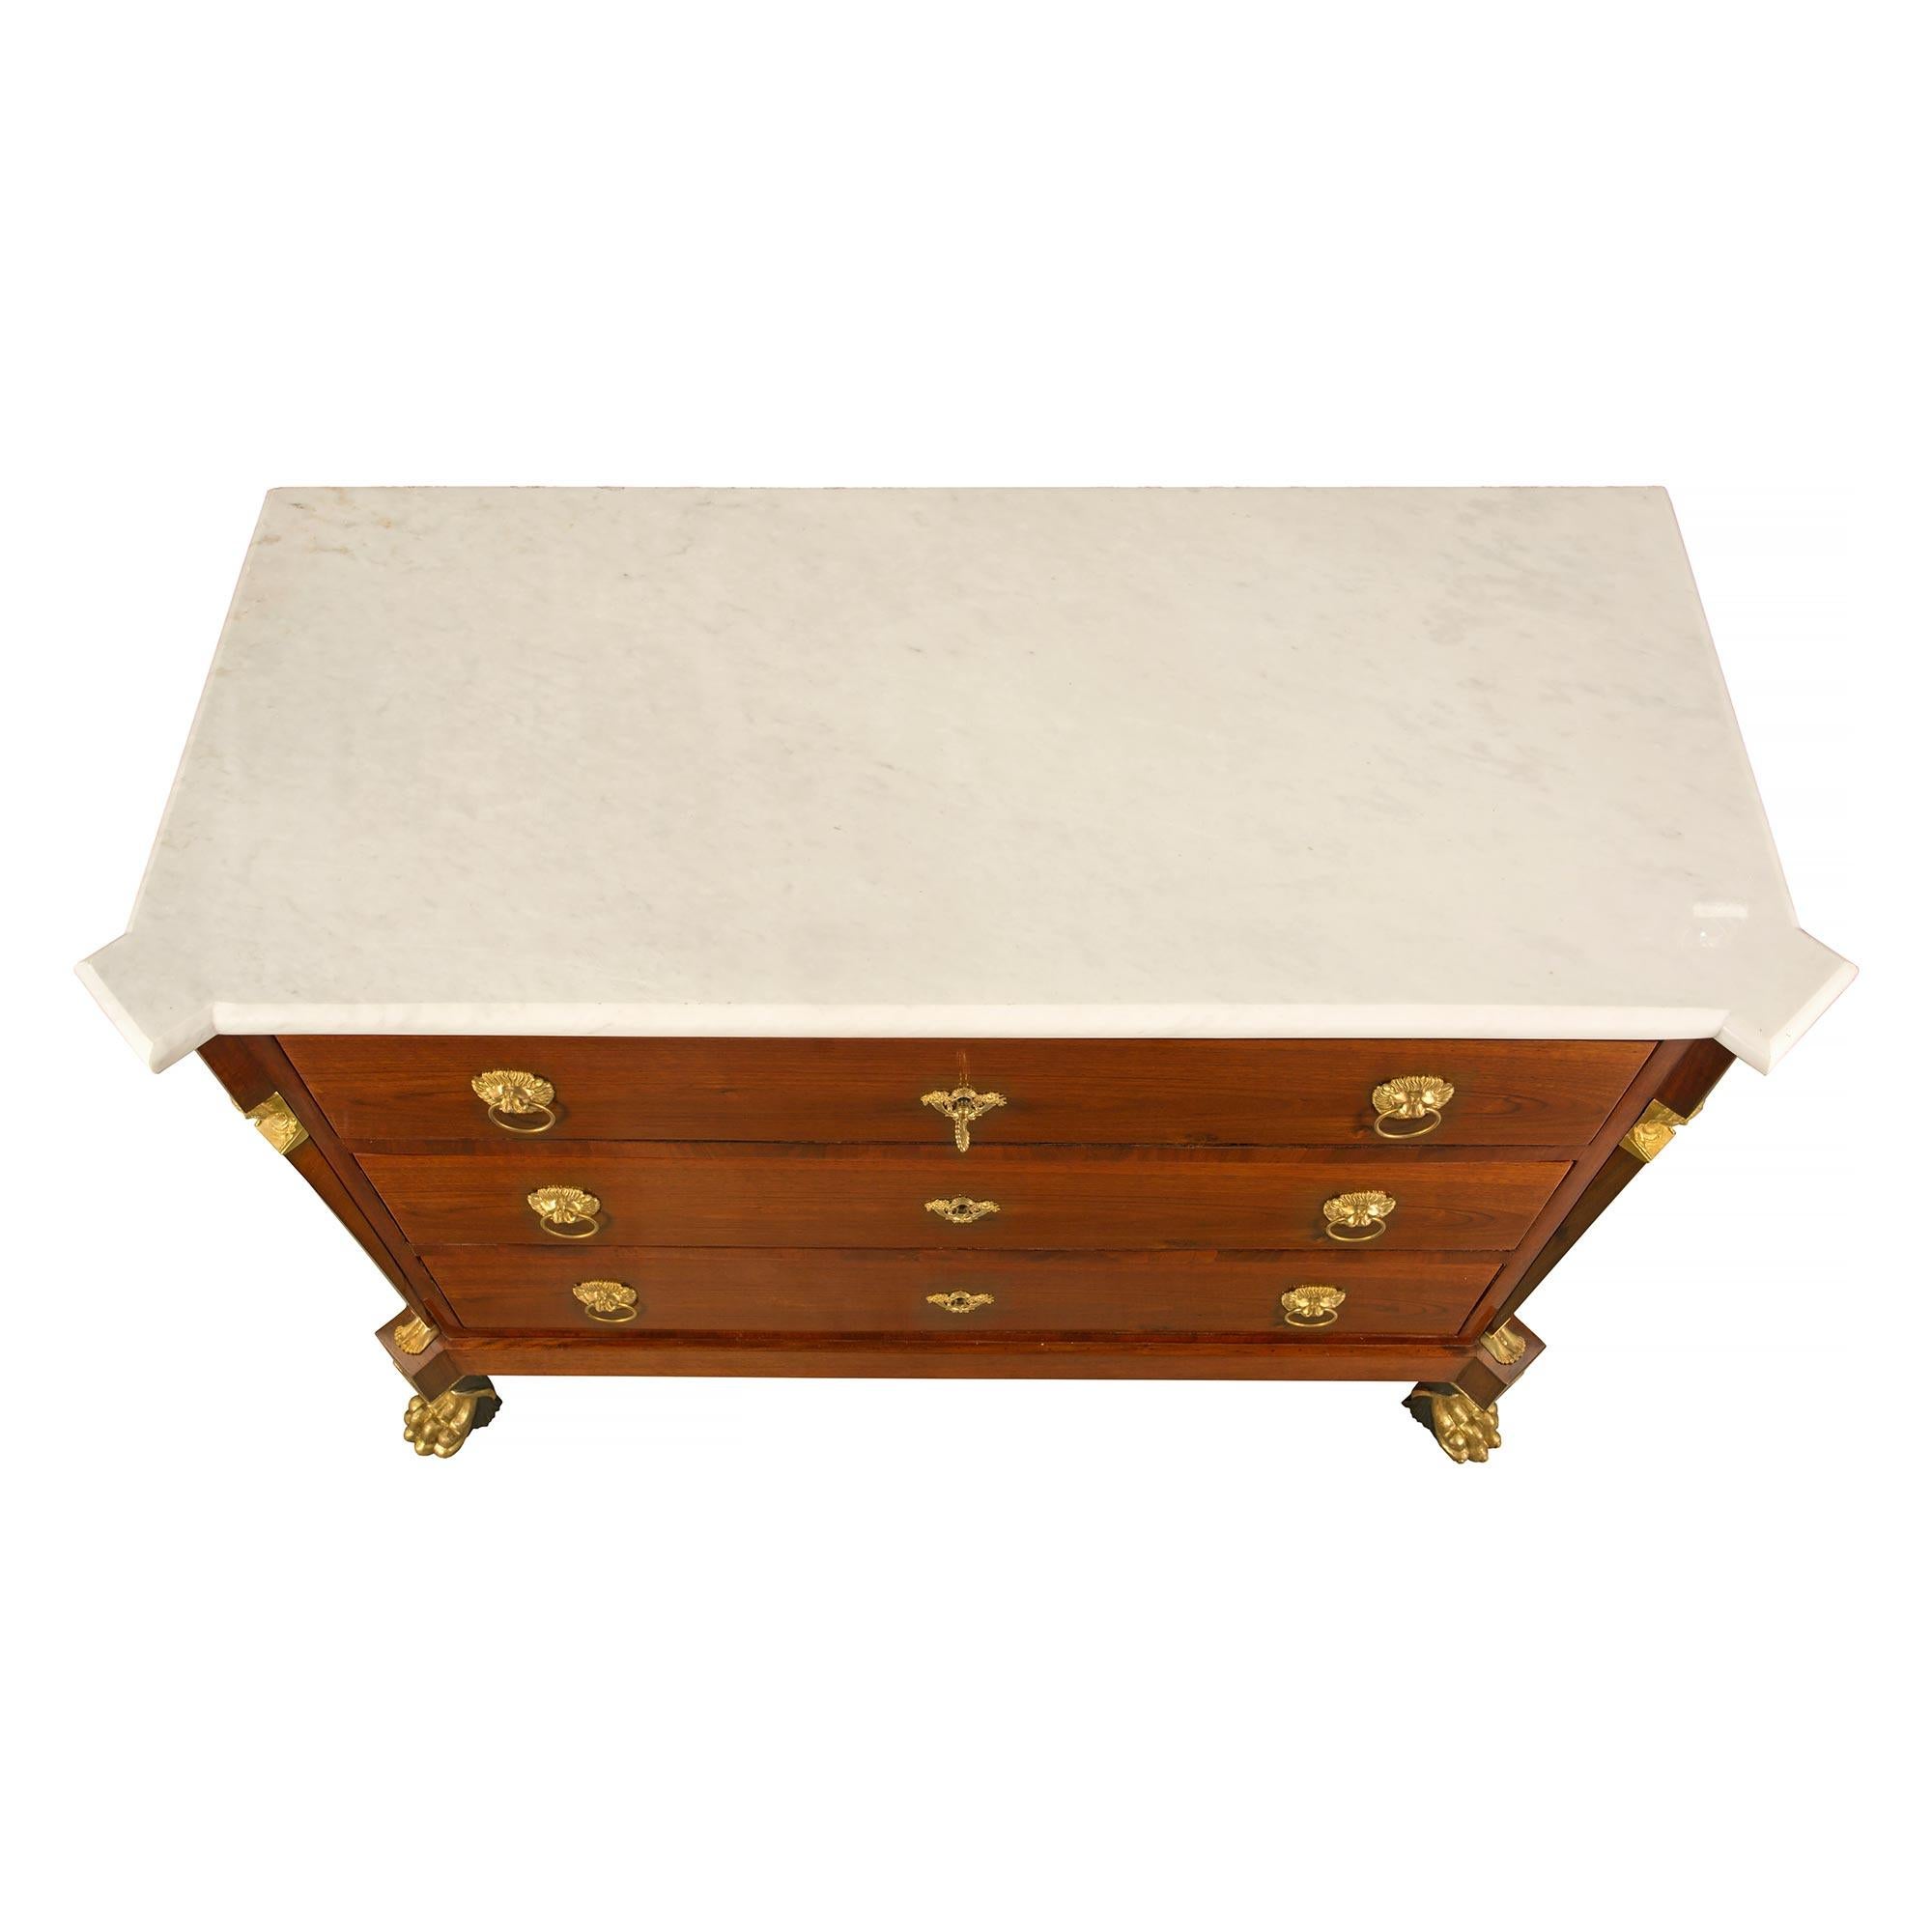 A unique and extremely decorative pair of Italian 19th century Neo-Classical st. mahogany, giltwood, ormolu and marble chests. Each three drawer chest is raised by handsome and richly carved polychrome and giltwood paw feet. Above each foot are